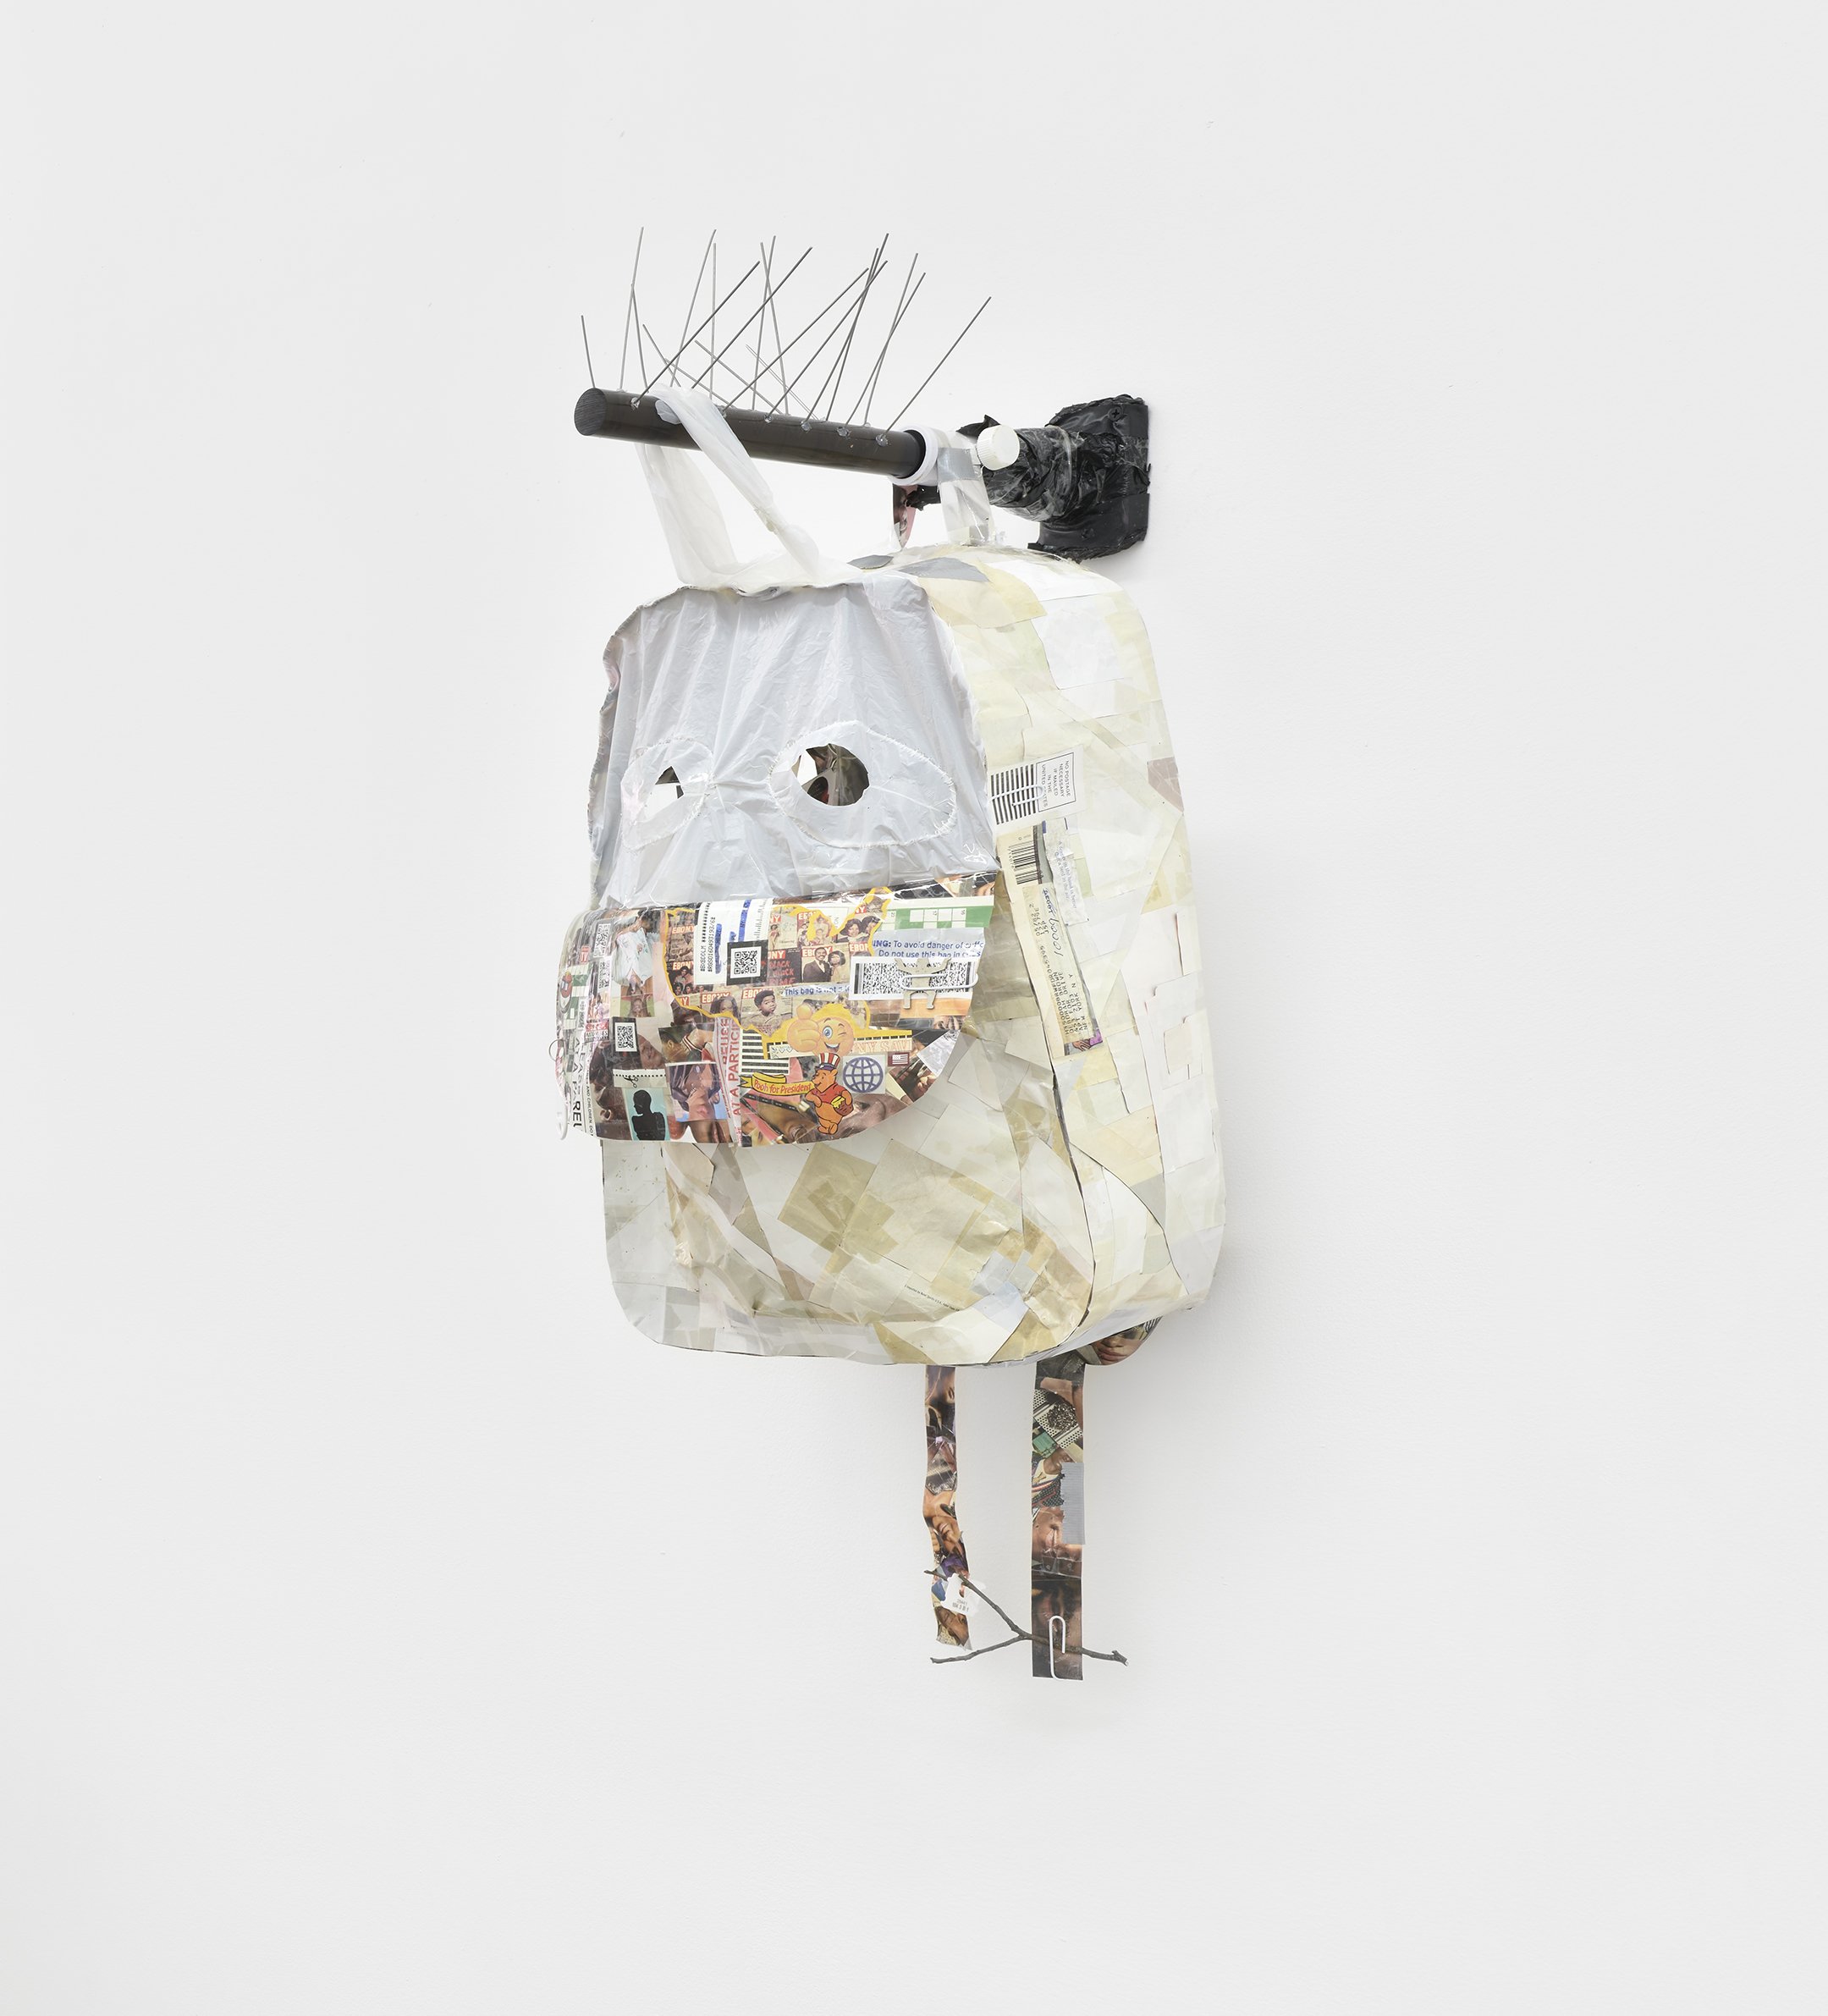  Elzie Williams III  Do You Know Where You're Going To? , 2023 magazine swatches of black and brown faces with the color white on reverse,  found images, plastic, found objects, acrylic rod, metal, flagpole bracket, light  33 x 14 x 12 inches (84 x 3